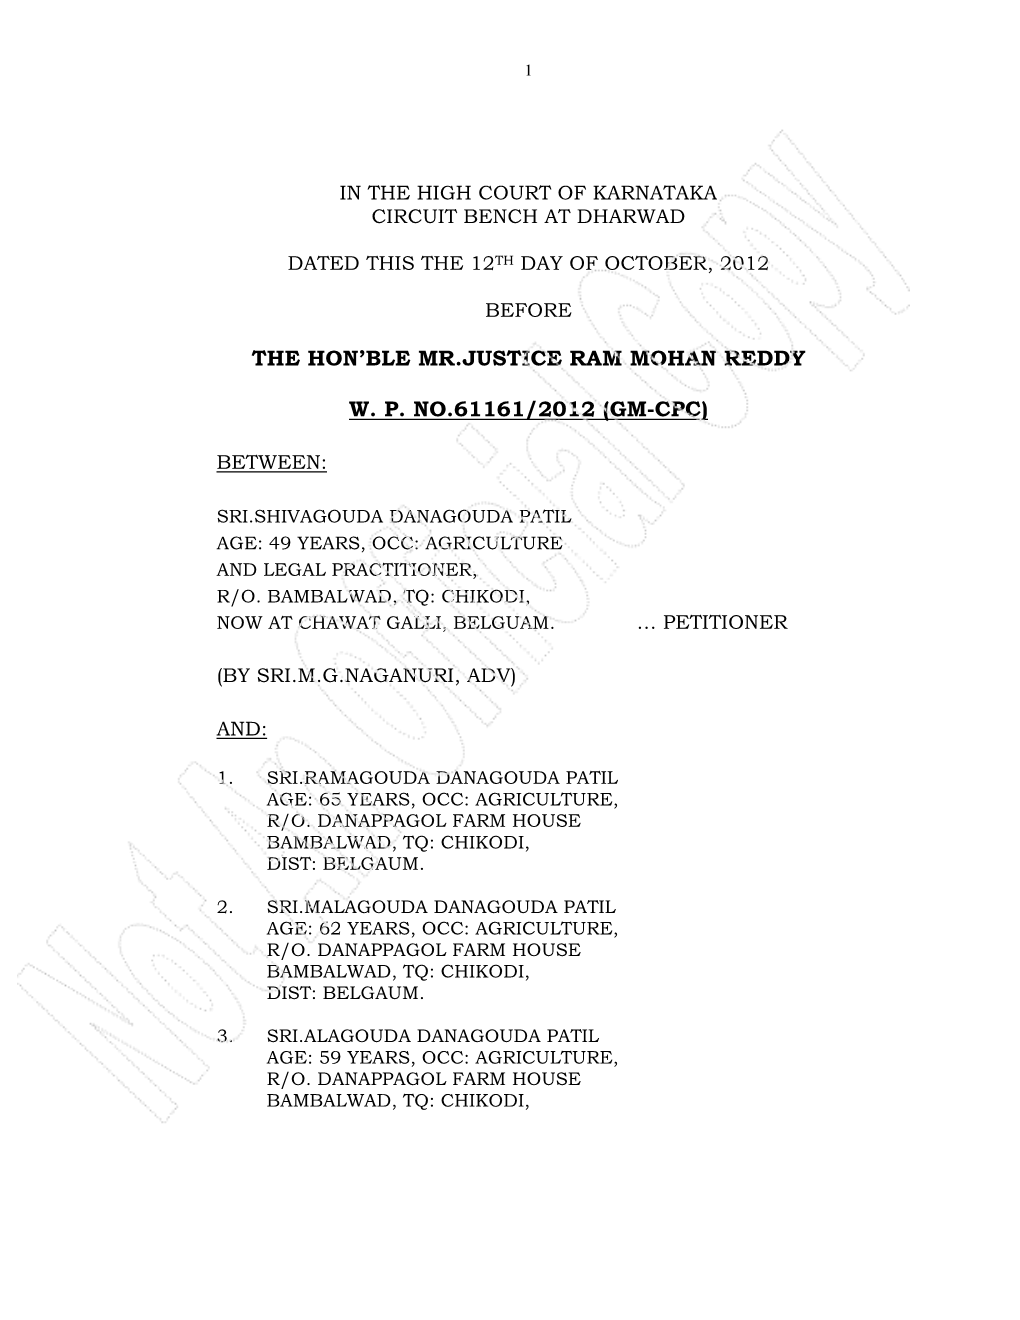 The Hon'ble Mr.Justice Ram Mohan Reddy W. P. No.61161/2012 (Gm-Cpc)